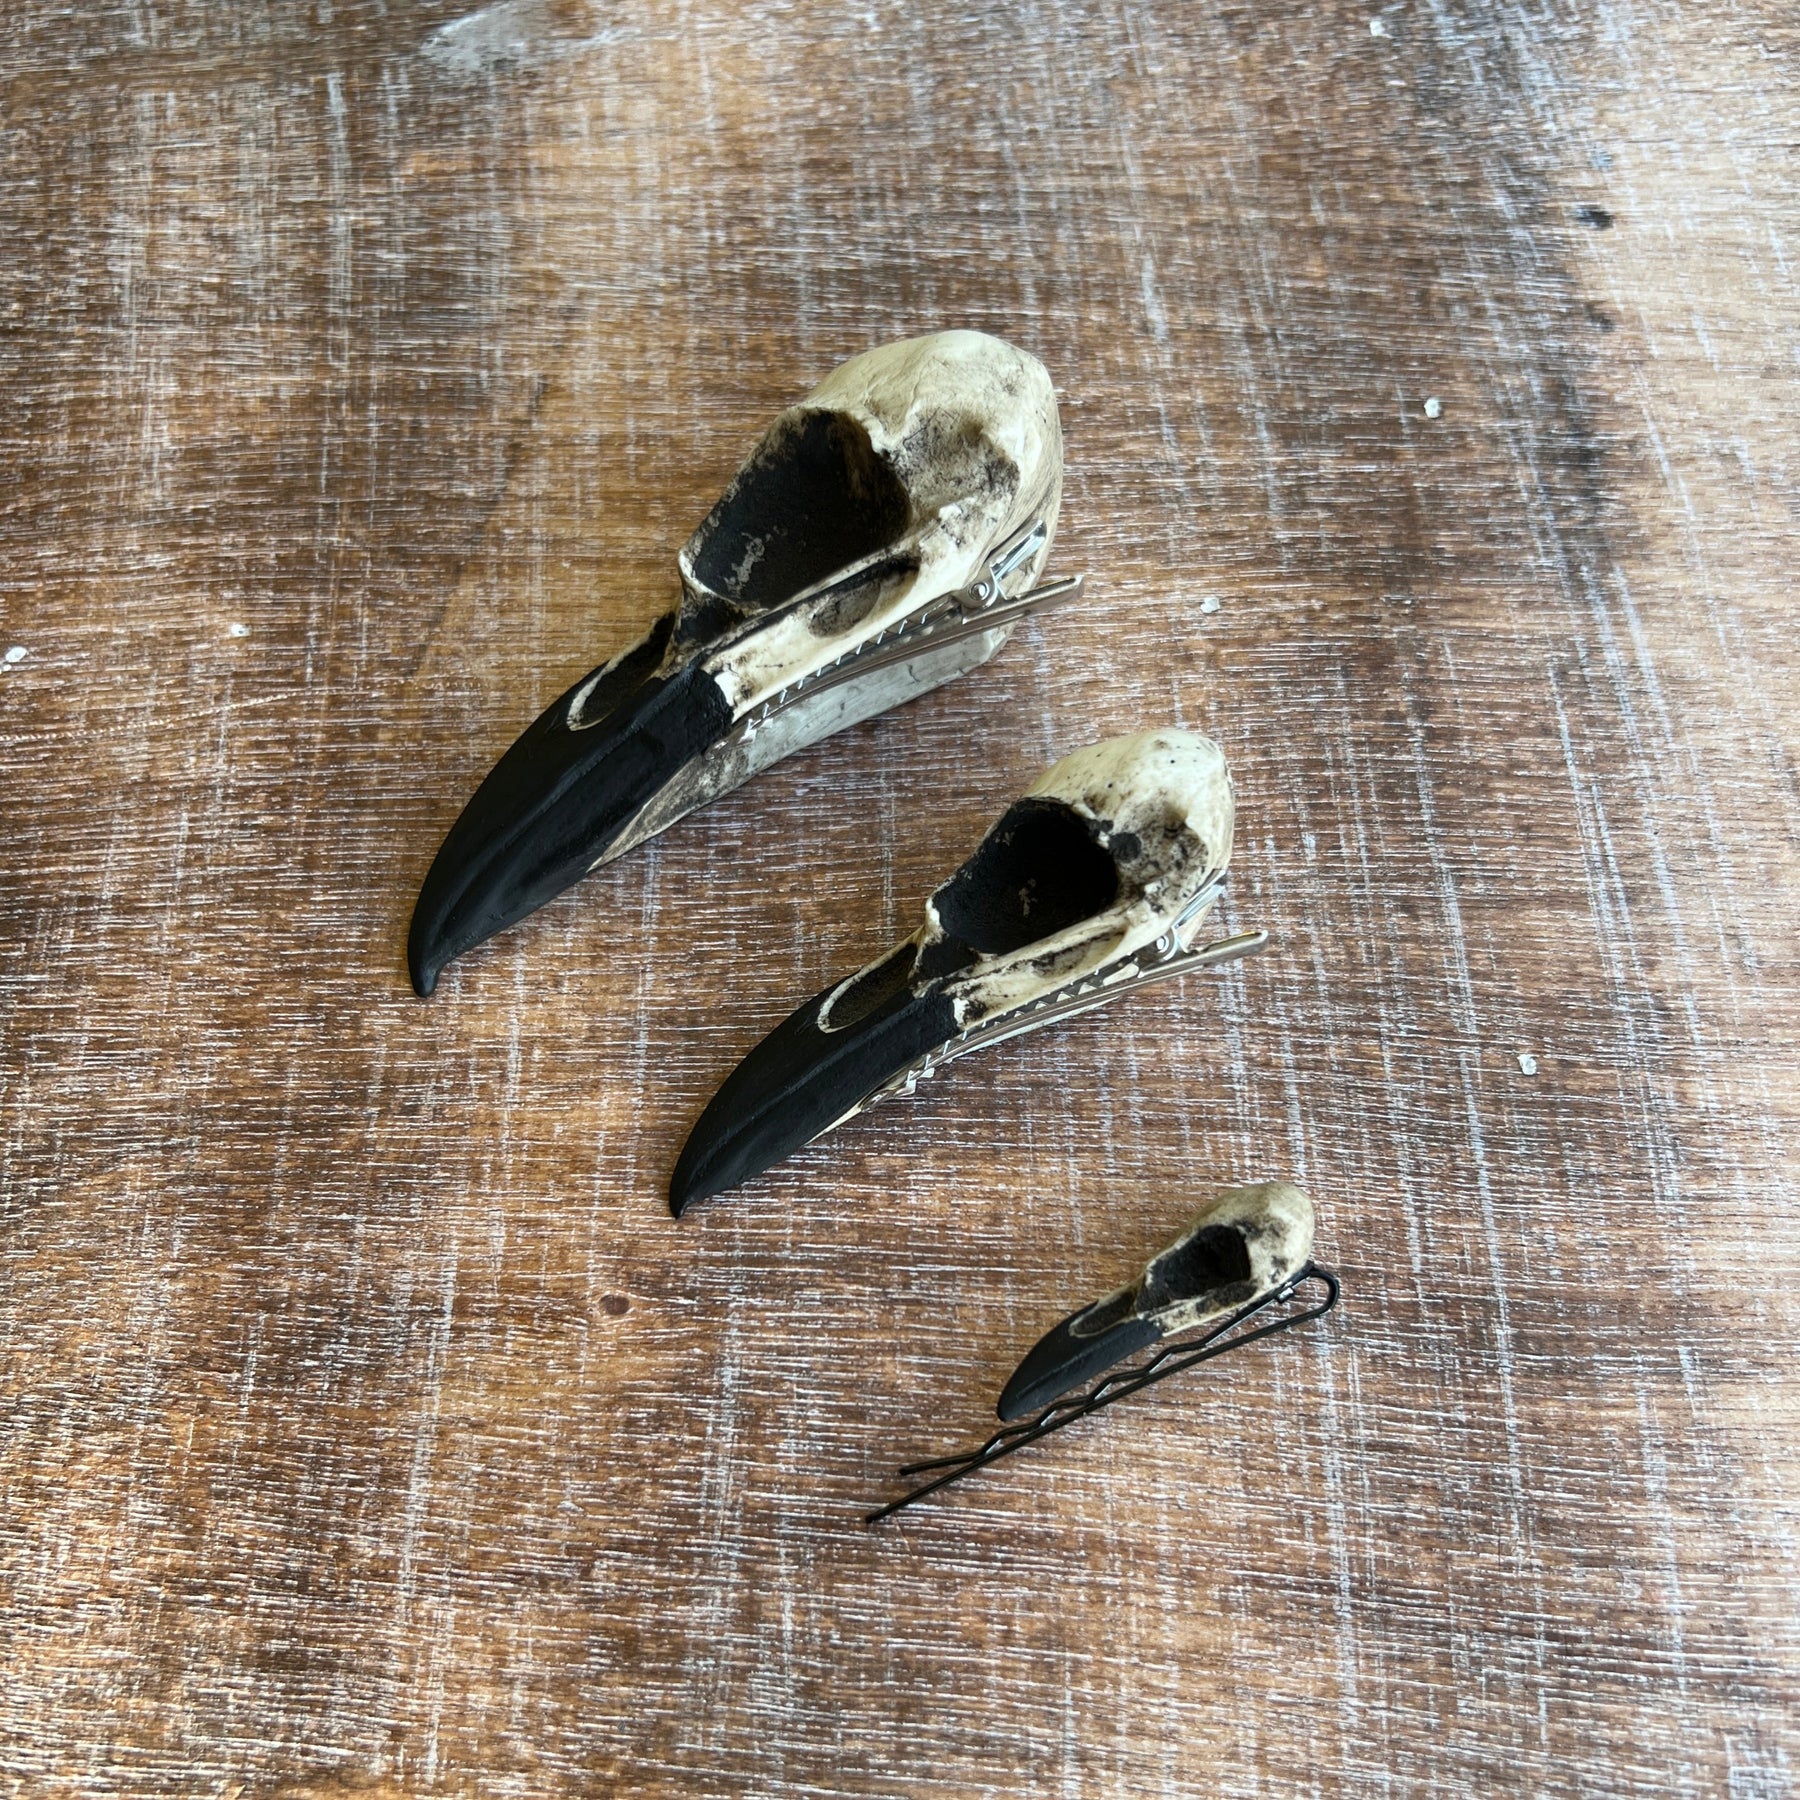 Skull bride Halloween woodland animal skull bone jewelry rave skull hair clip pins made out of resin by artist Raven Ranch Studio.